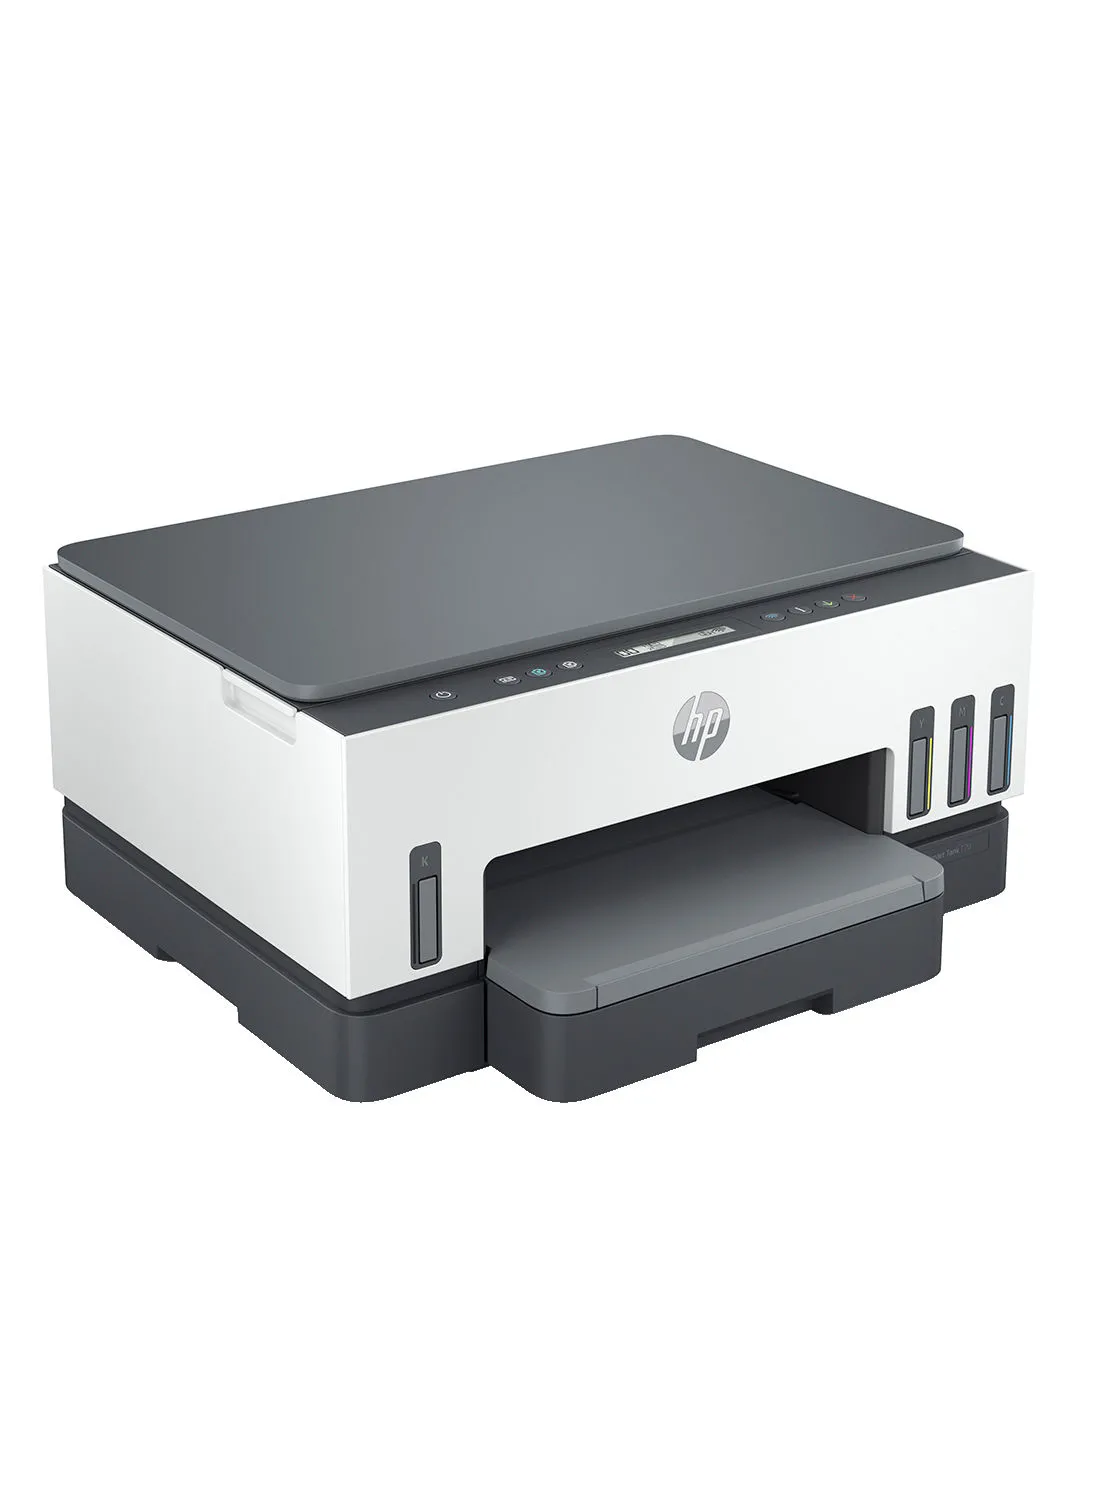 HP Smart Tank 720 All-in-One Printer Wireless, Print, Scan, Copy, Auto Duplex Printing, Print up to 18000 black or 8000 color pages [6UU46A] White/Grey